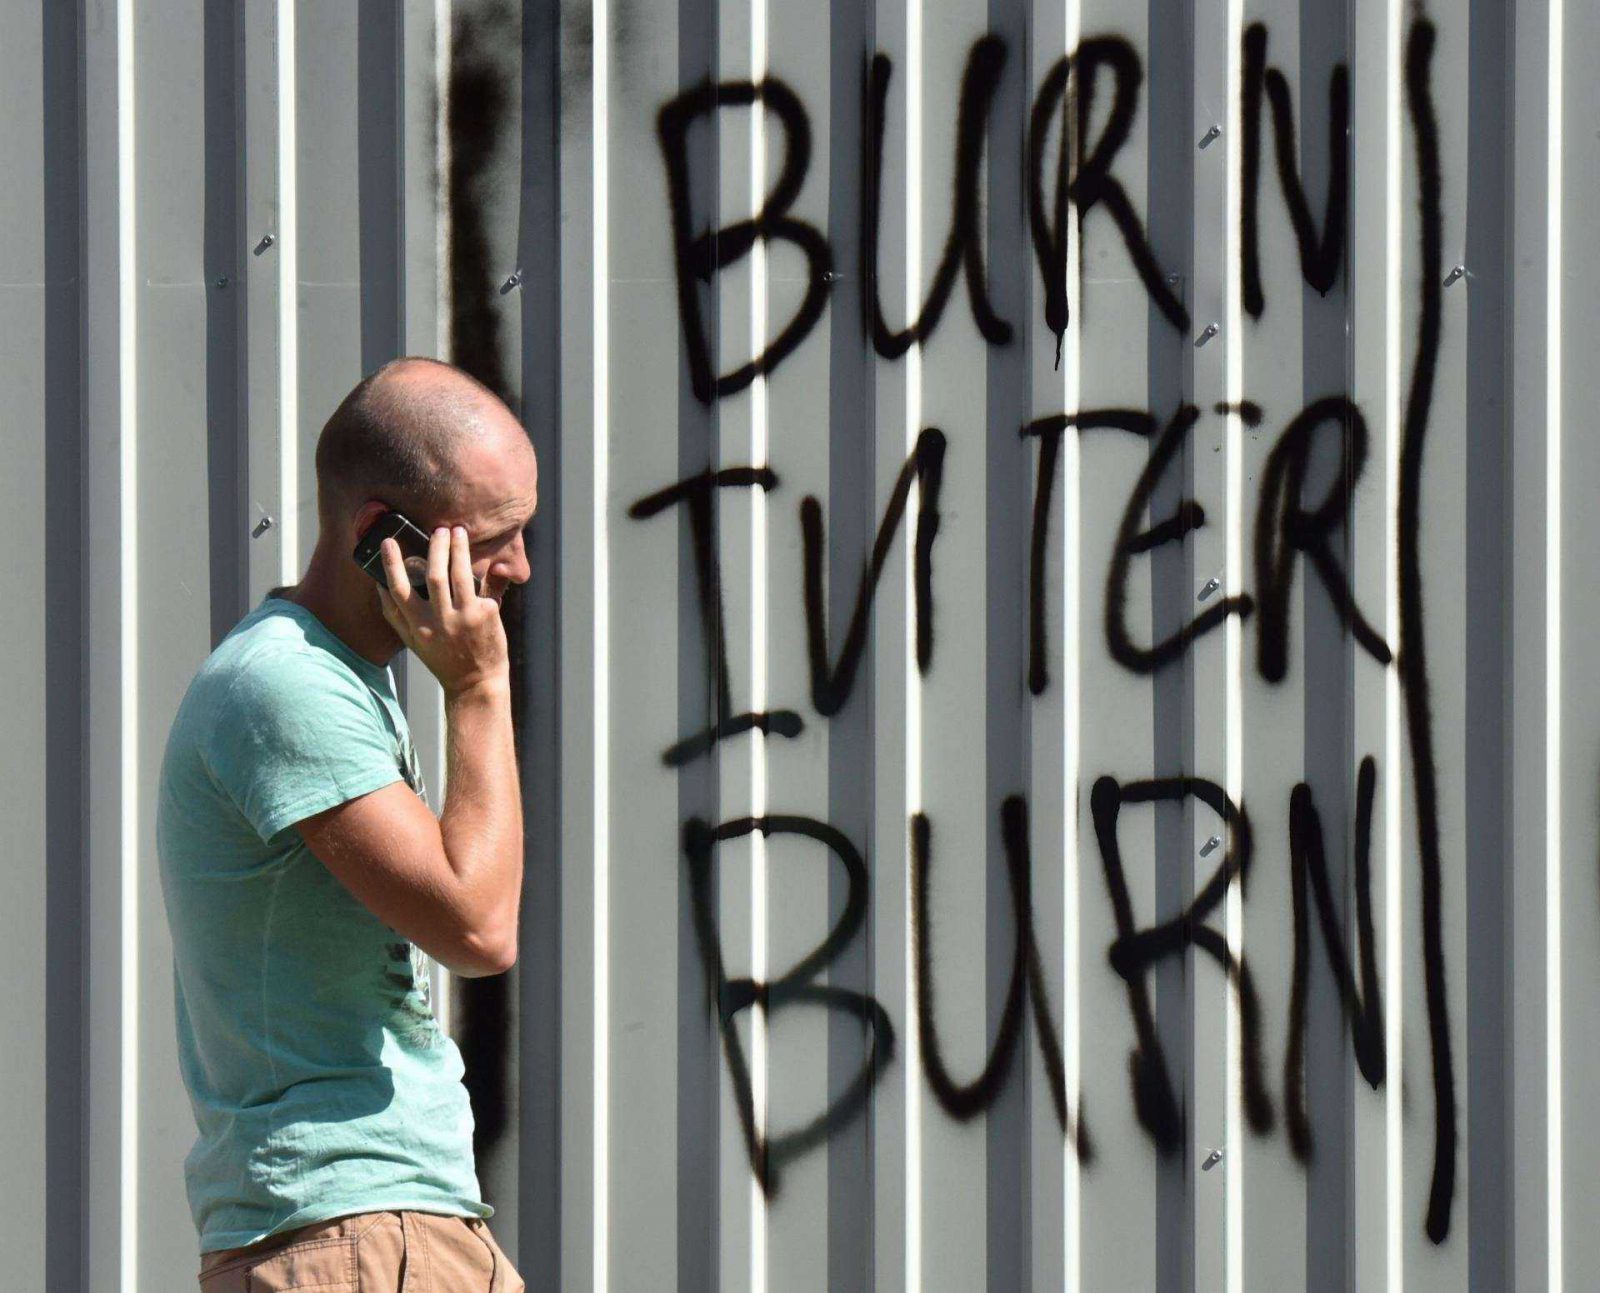 An activist speaks on his mobile phone as he walks graffiti that reads, "Burn Inter, burn"  on a protective barricade placed at the entrance of the TV channel "Inter" during a protest by activists in Kiev on September 5, 2016.  Activists, who accused Inter -- one of the biggest Ukrainian TV channels -- of a pro-Russian position and working for the Kremlin, blocked the channel's central office and the studios in order to hault its operation.  / AFP PHOTO / SERGEI SUPINSKY